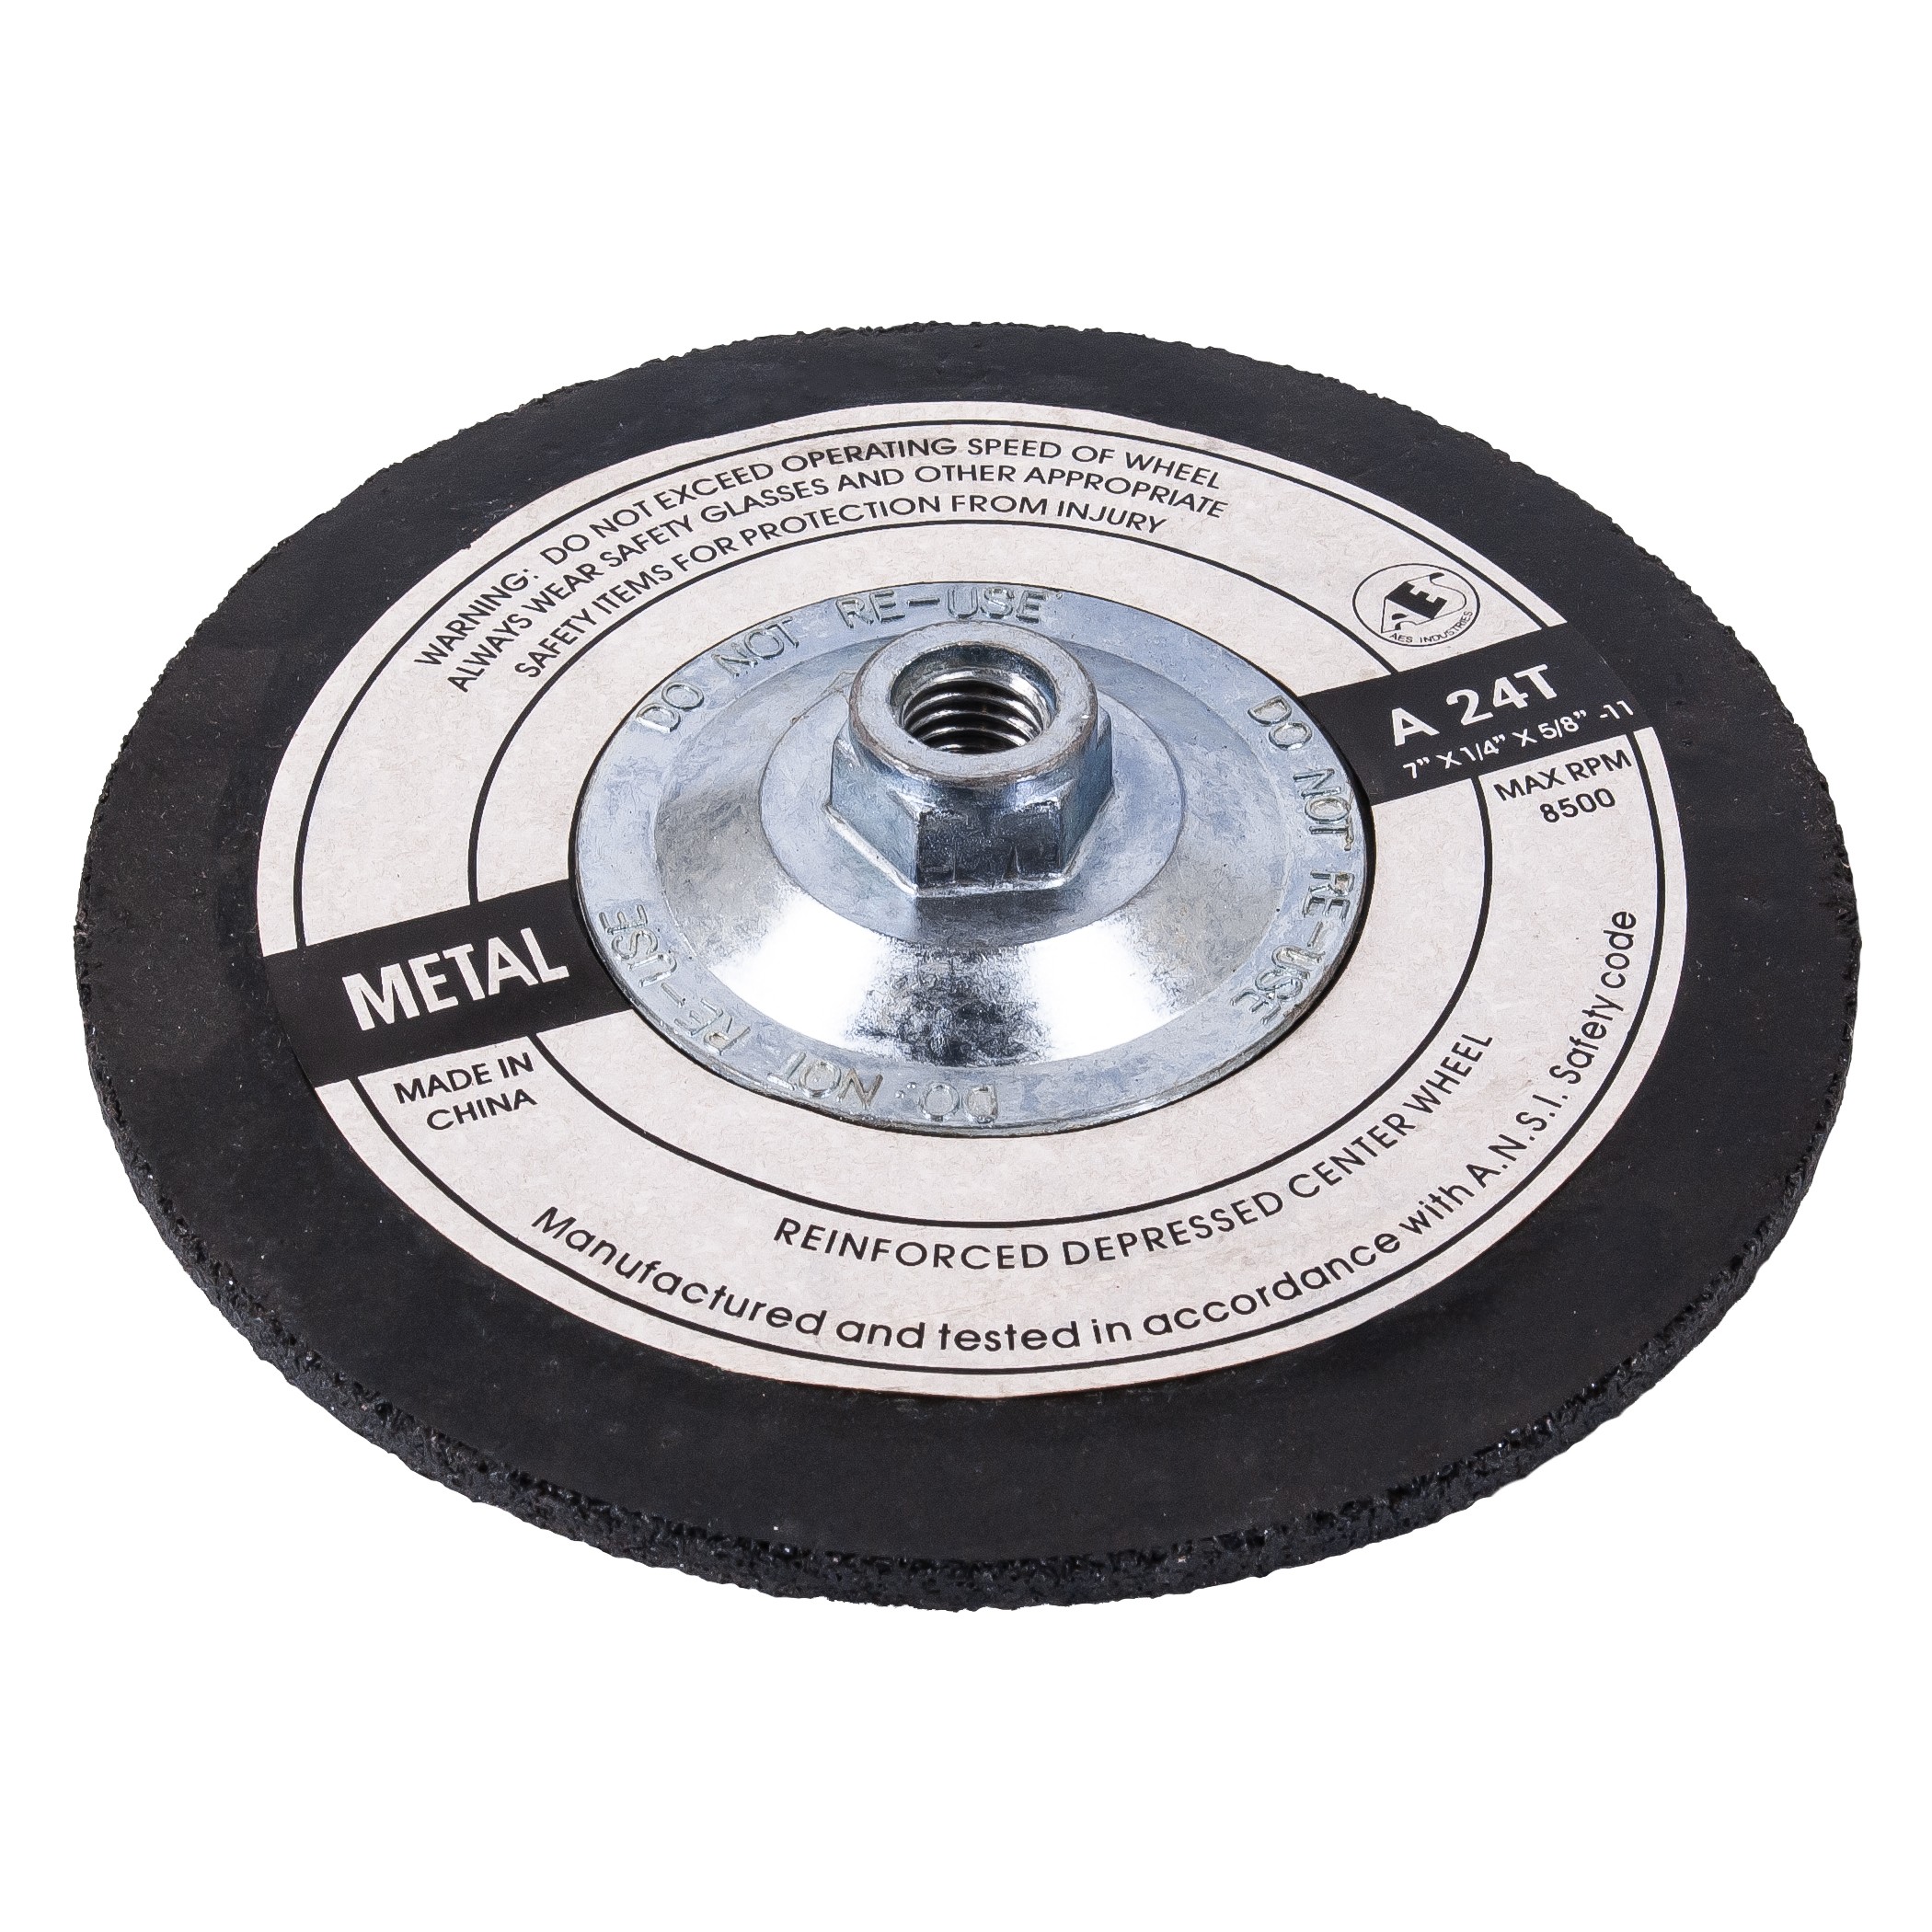 7" Grinding Disc - with 5/8" - 11 Hub